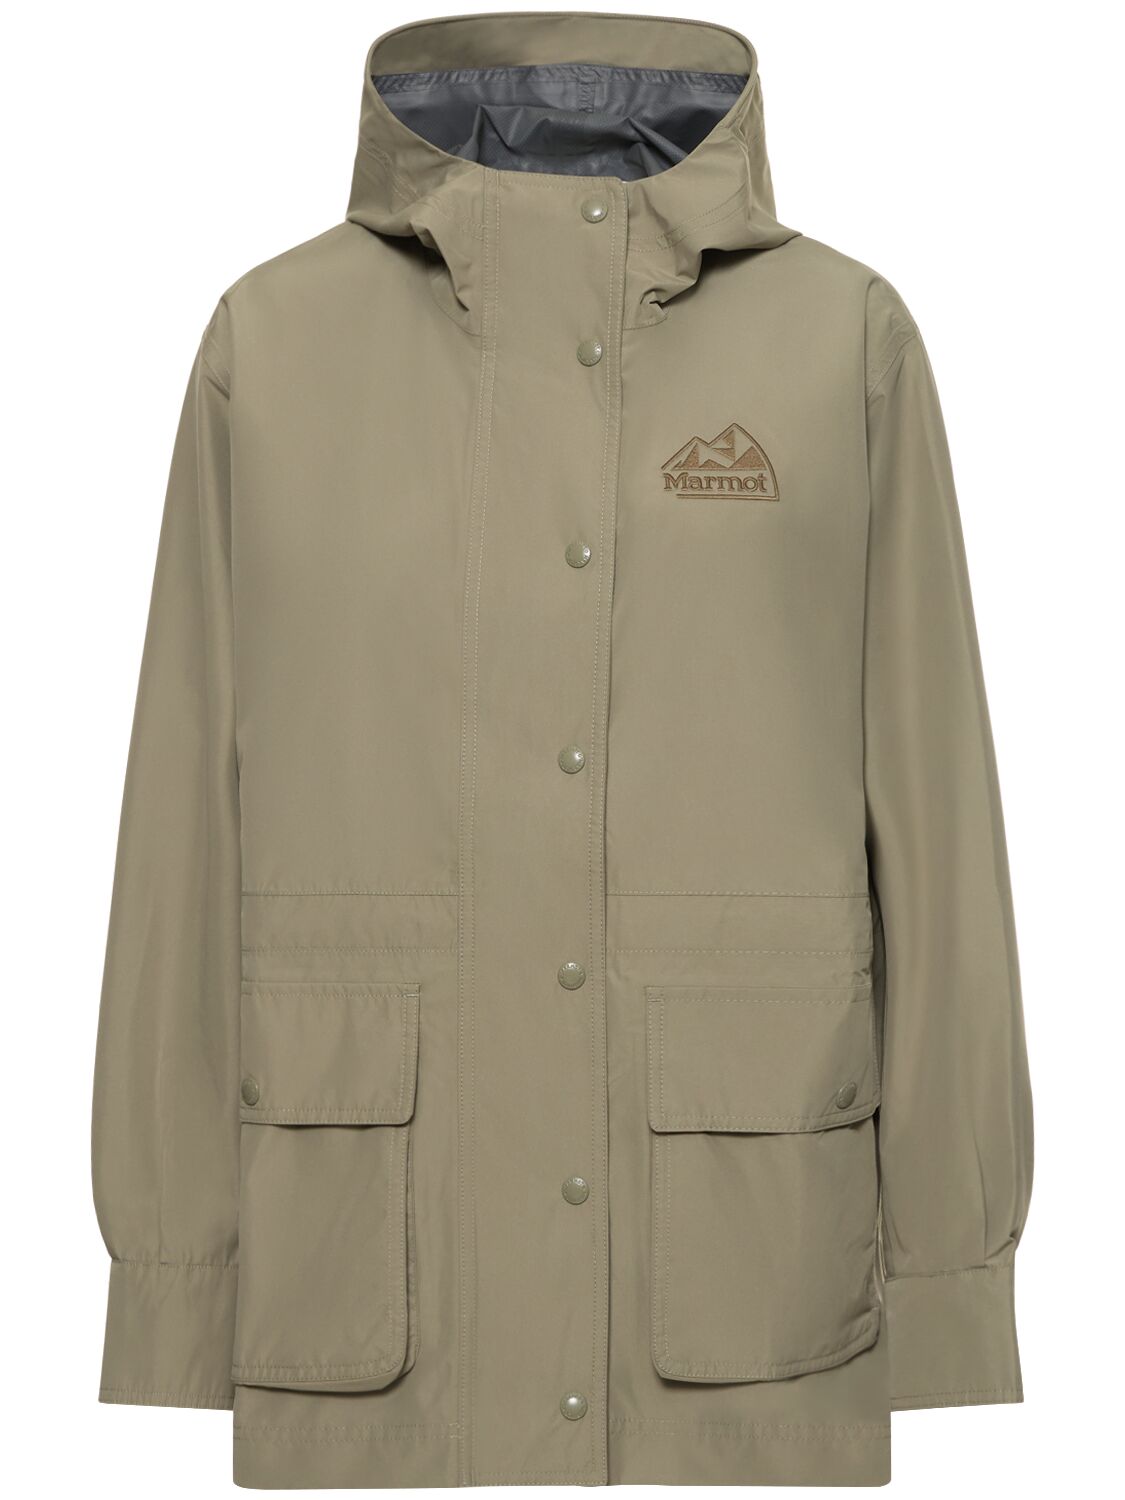 '78 All-weather Long Parka